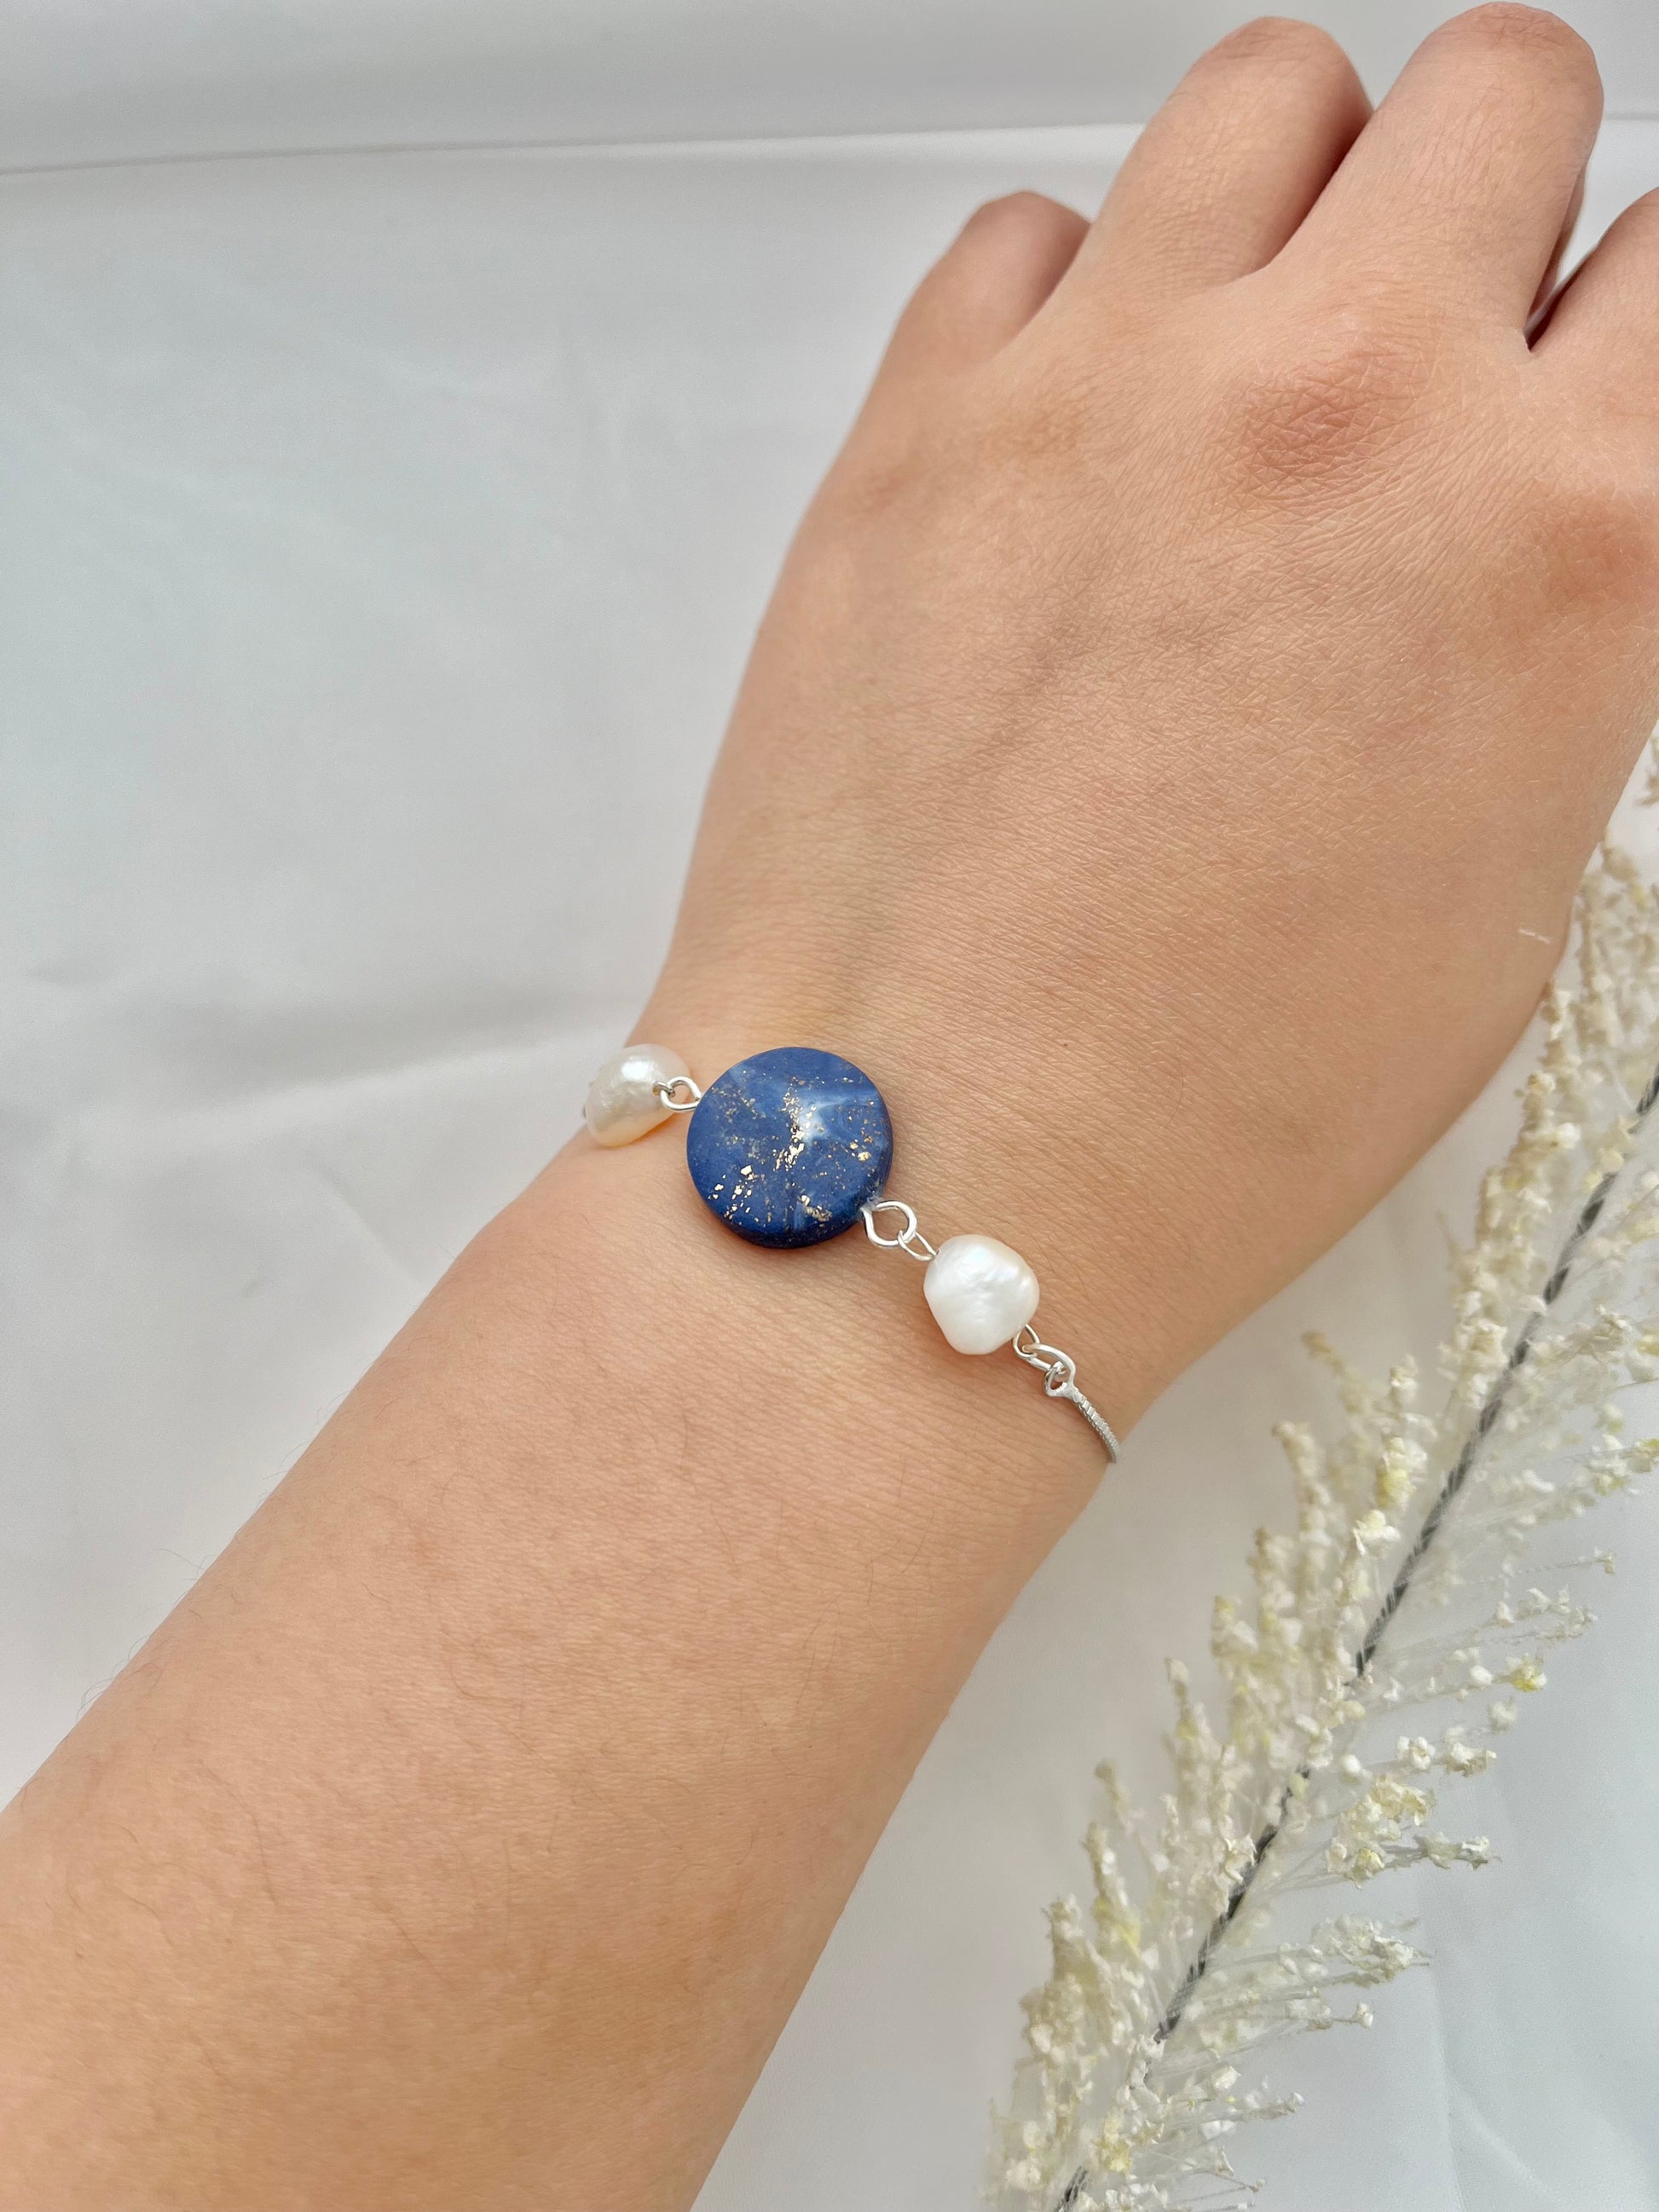 A rhodium plated bracelet with a dark blue clay circle with freshwater pearls on either side on a hand